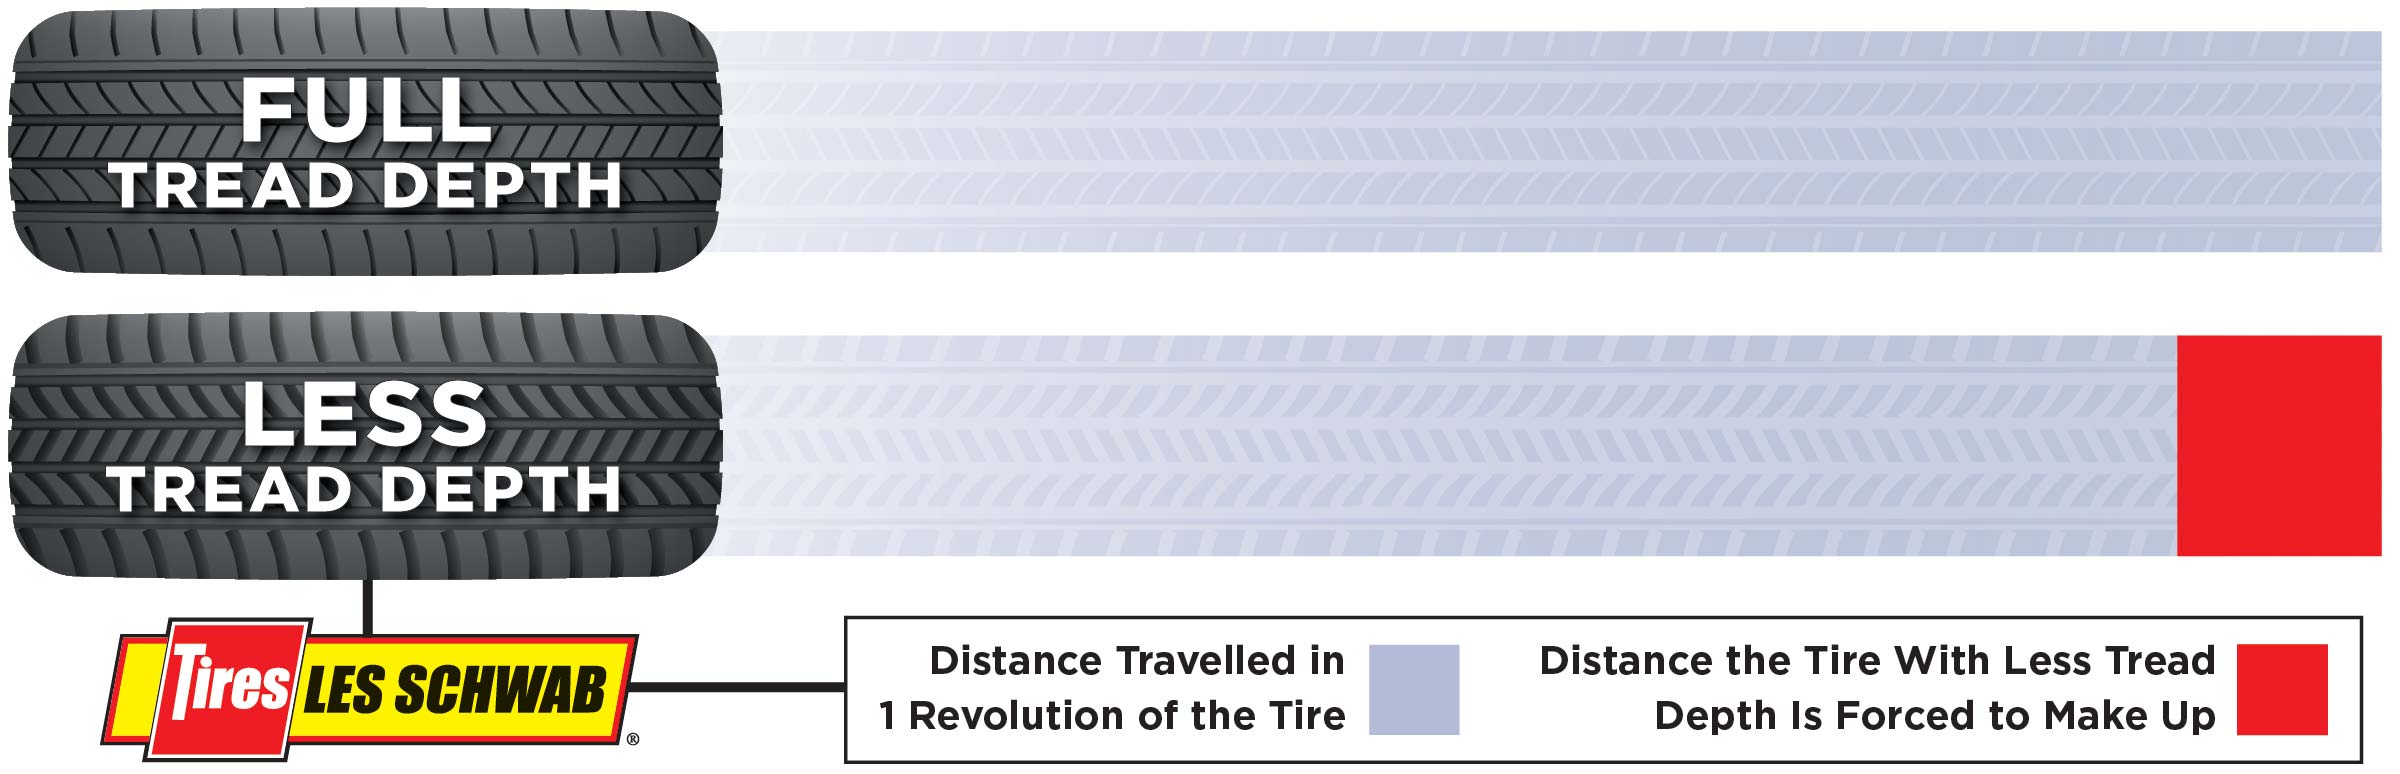 Difference in distance traveled between two tire sizes